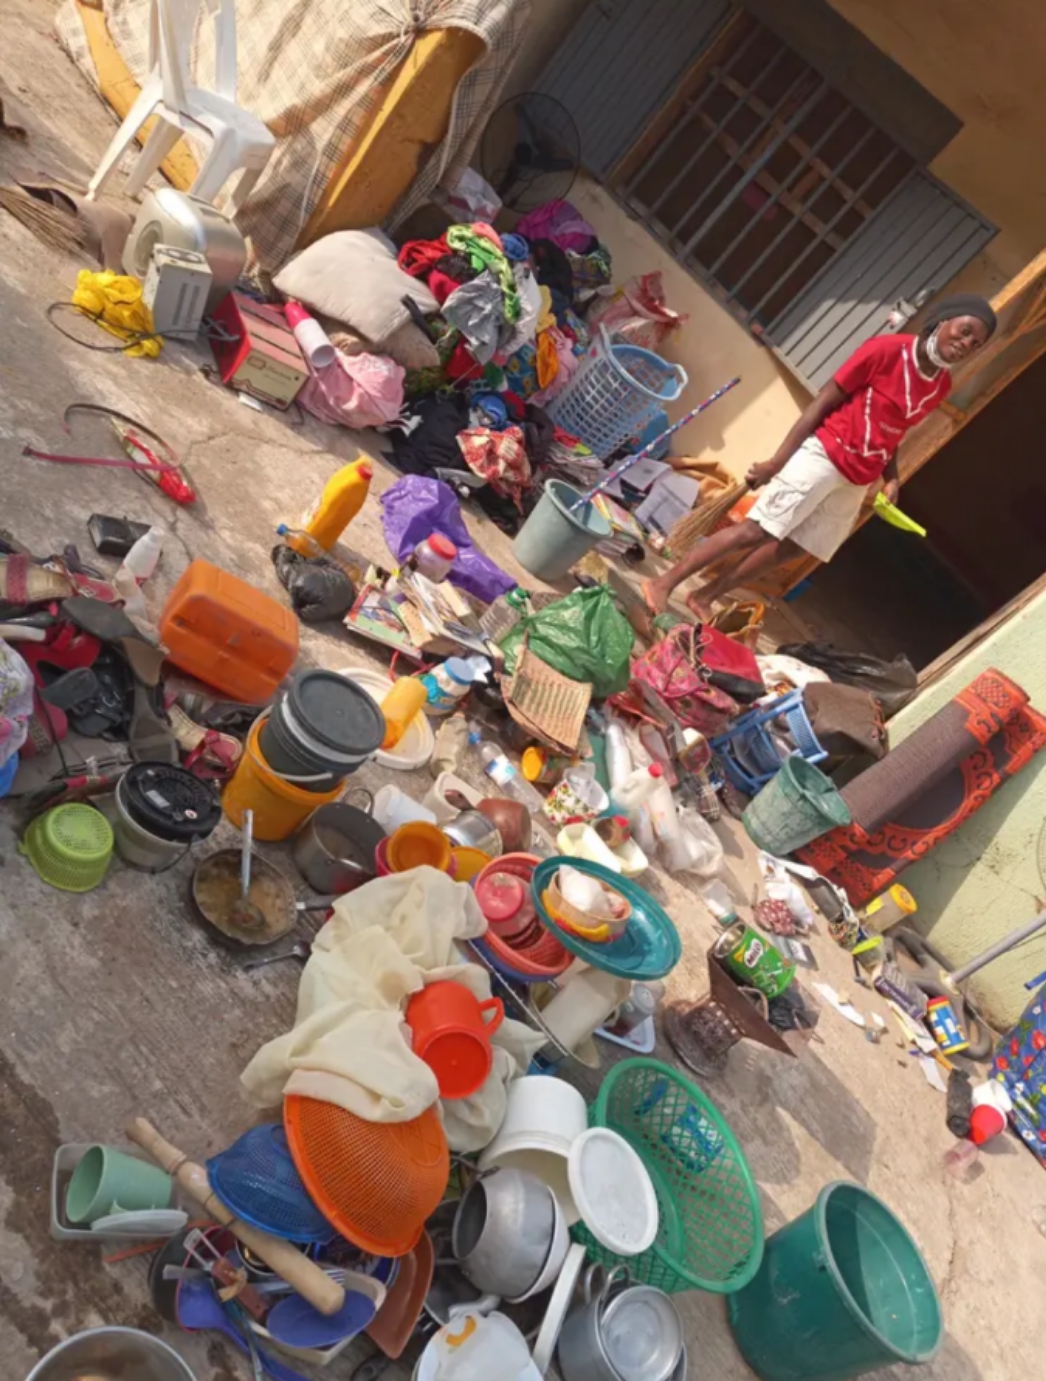 See Her Room Scattered, Nigerian Lady Resumes School